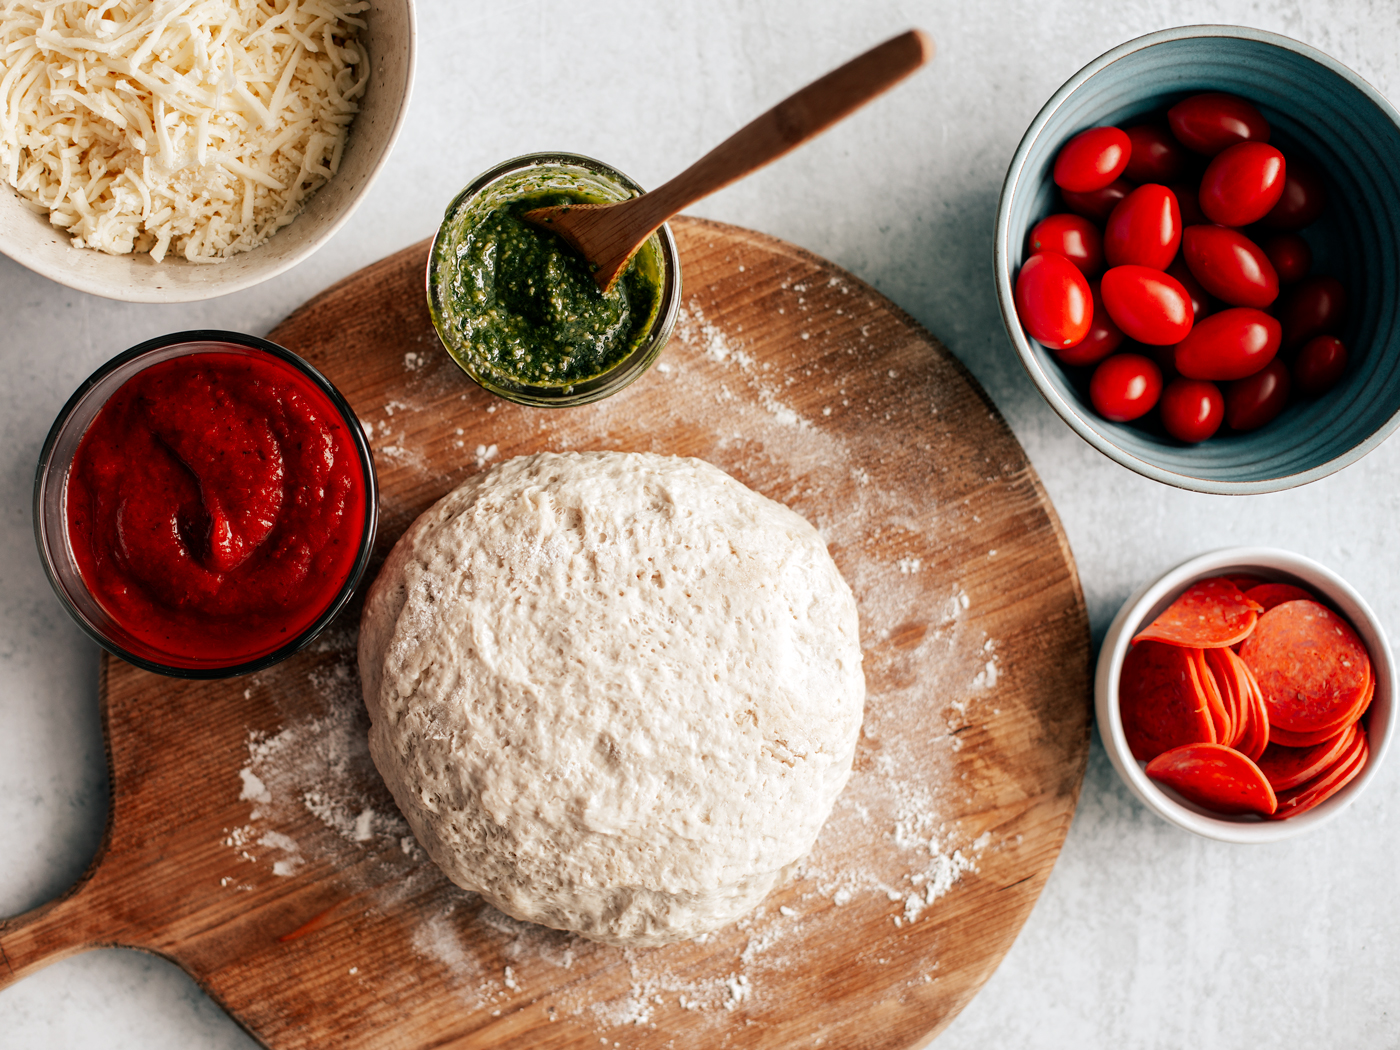 Ball of fresh pizza dough on top of floured wooden cutting board with a bowl of shredded cheese and small jars of sauce, pesto, tomatoes, and pepperoni.